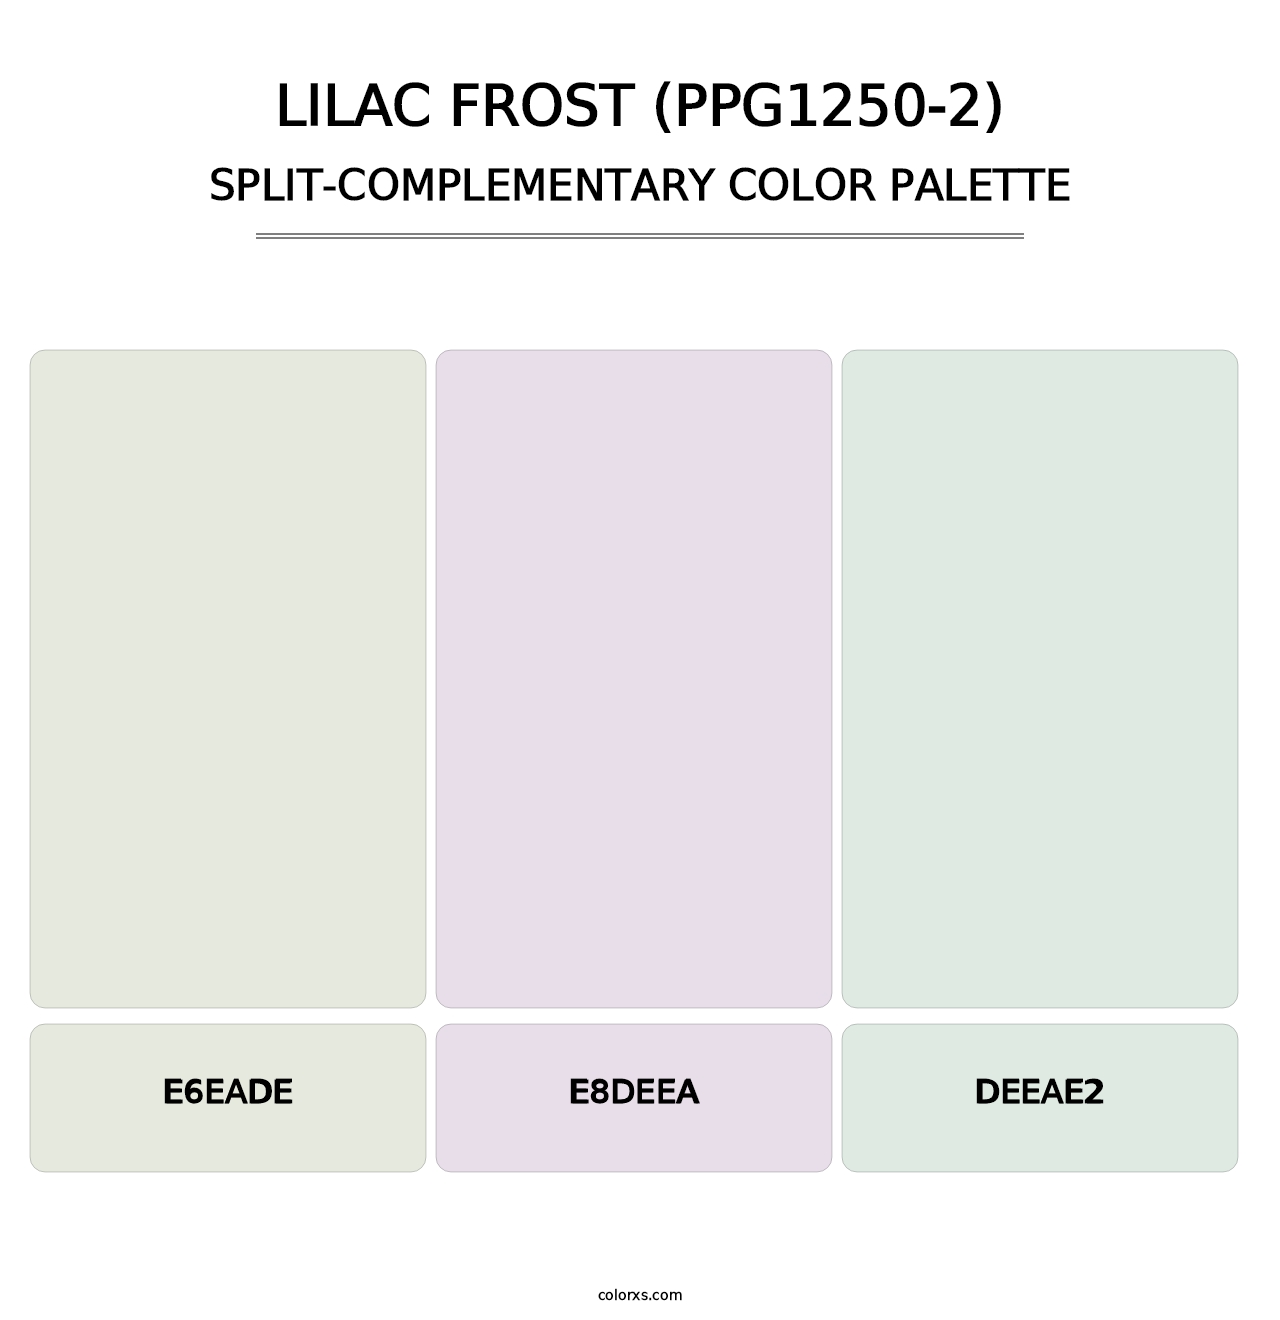 Lilac Frost (PPG1250-2) - Split-Complementary Color Palette